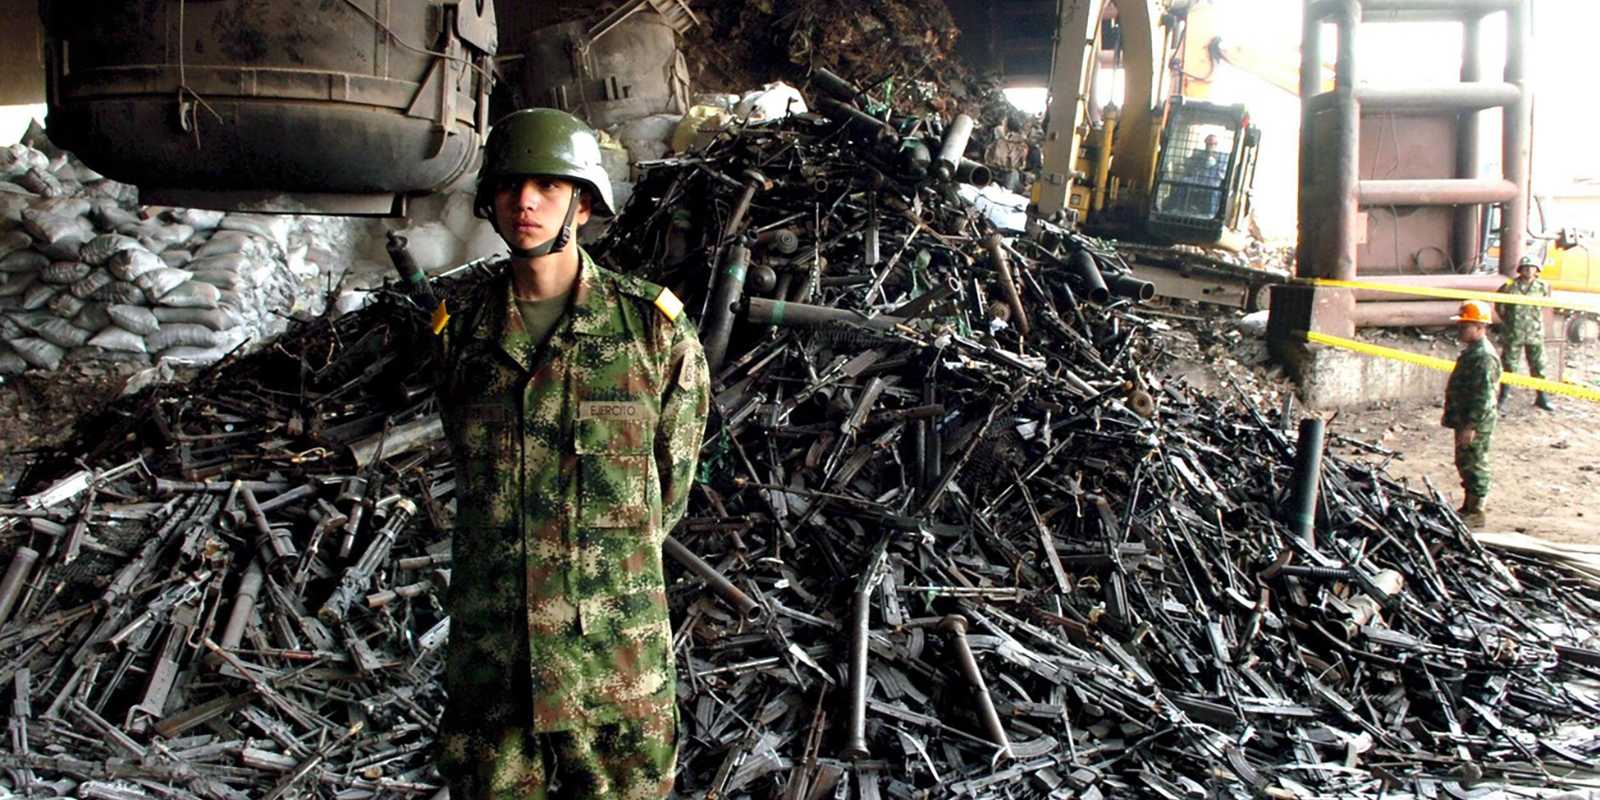 On the left there is a soldier in uniform. Behind him there is a pile of weapons.